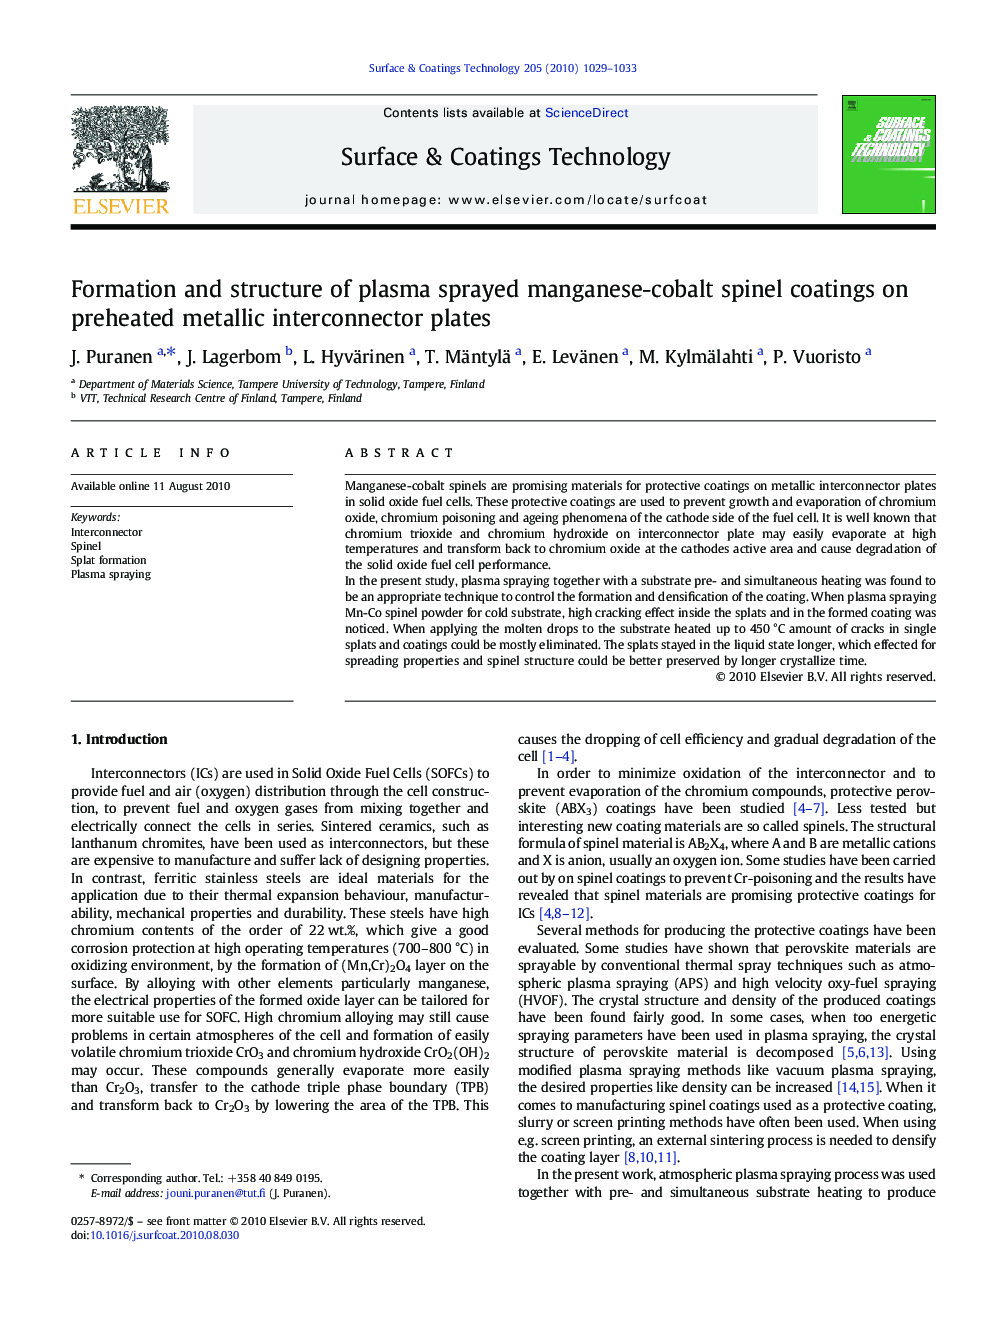 Formation and structure of plasma sprayed manganese-cobalt spinel coatings on preheated metallic interconnector plates